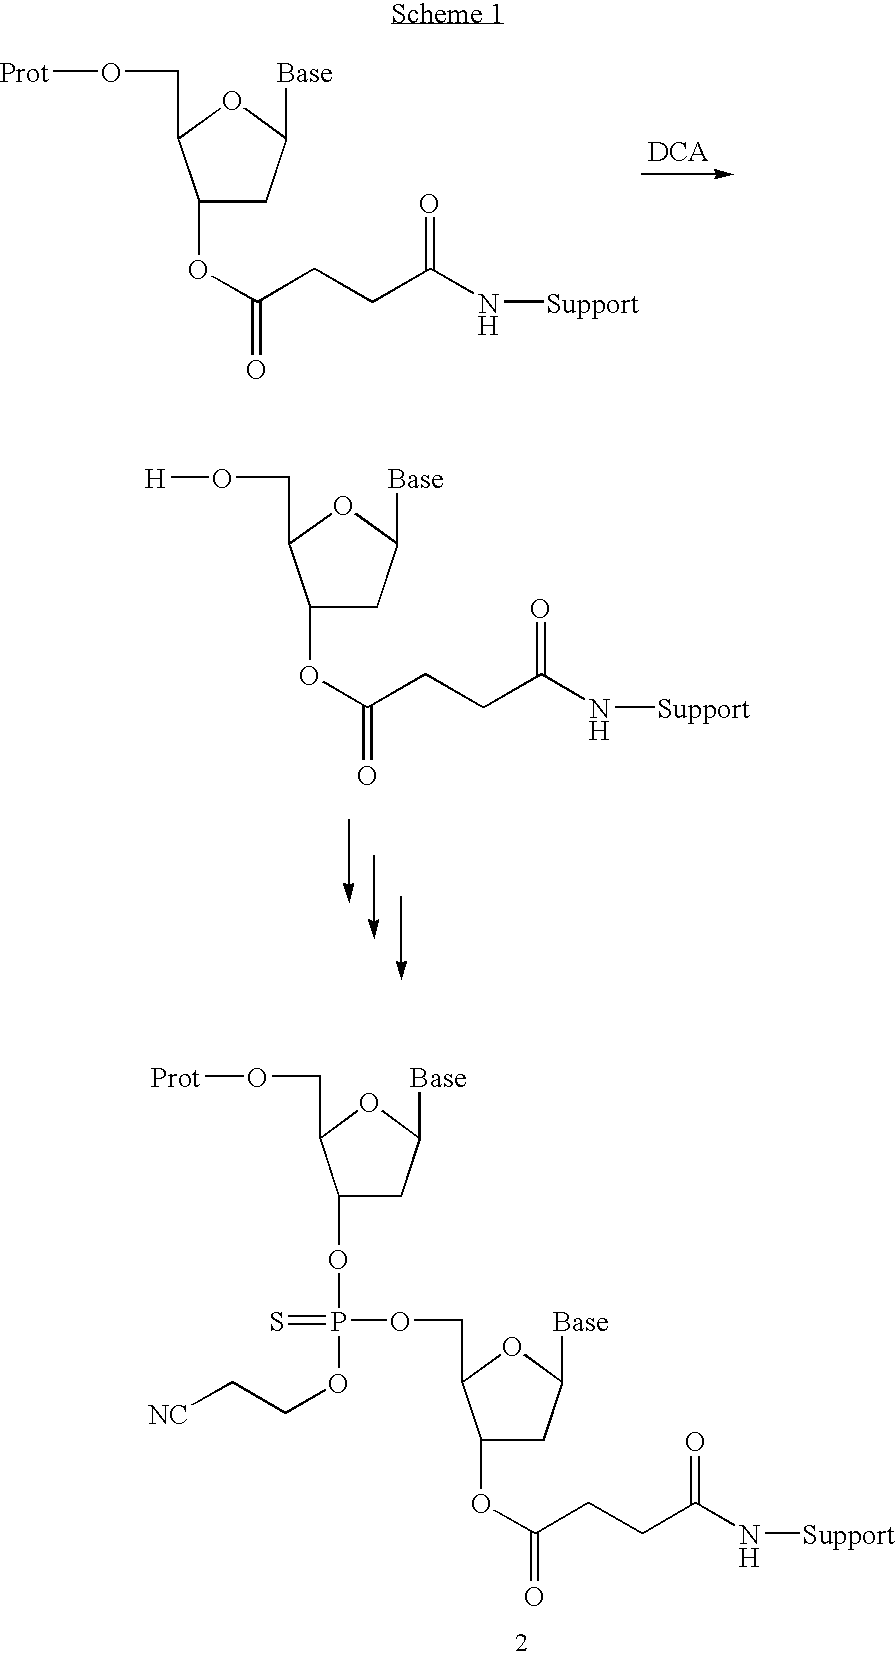 Methods for detection of chloral hydrate in dichloroacetic acid